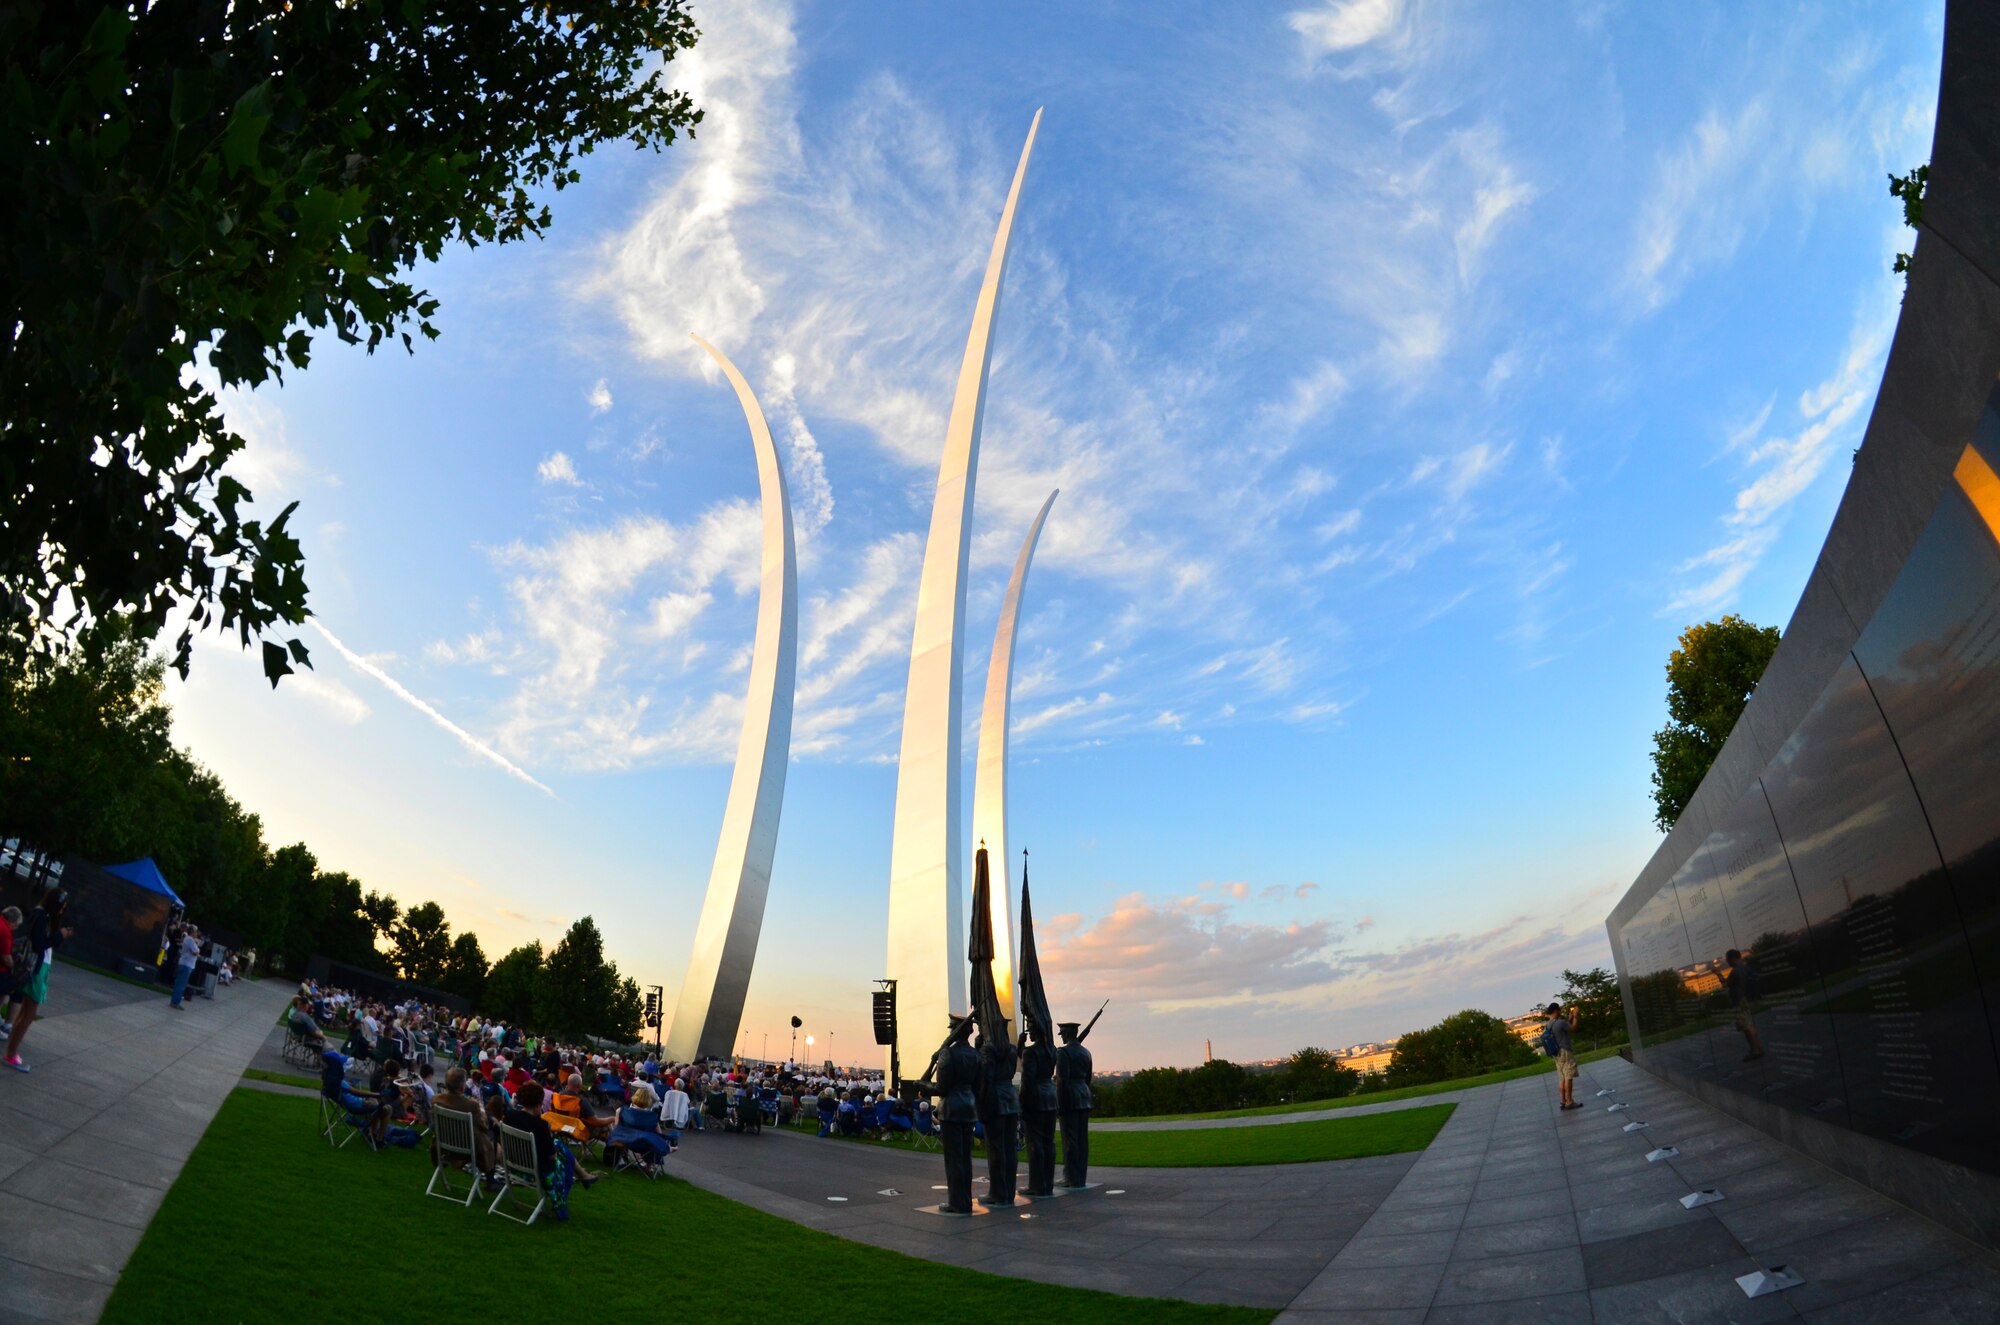 The 2017 Summer Concert Series begins at the Air Force Memorial on Friday, June 2, 2017. All concerts begin at 7:30 p.m. and are subject to cancellation due to weather. (Photo by Chief Master Sgt. Kevin Burns)